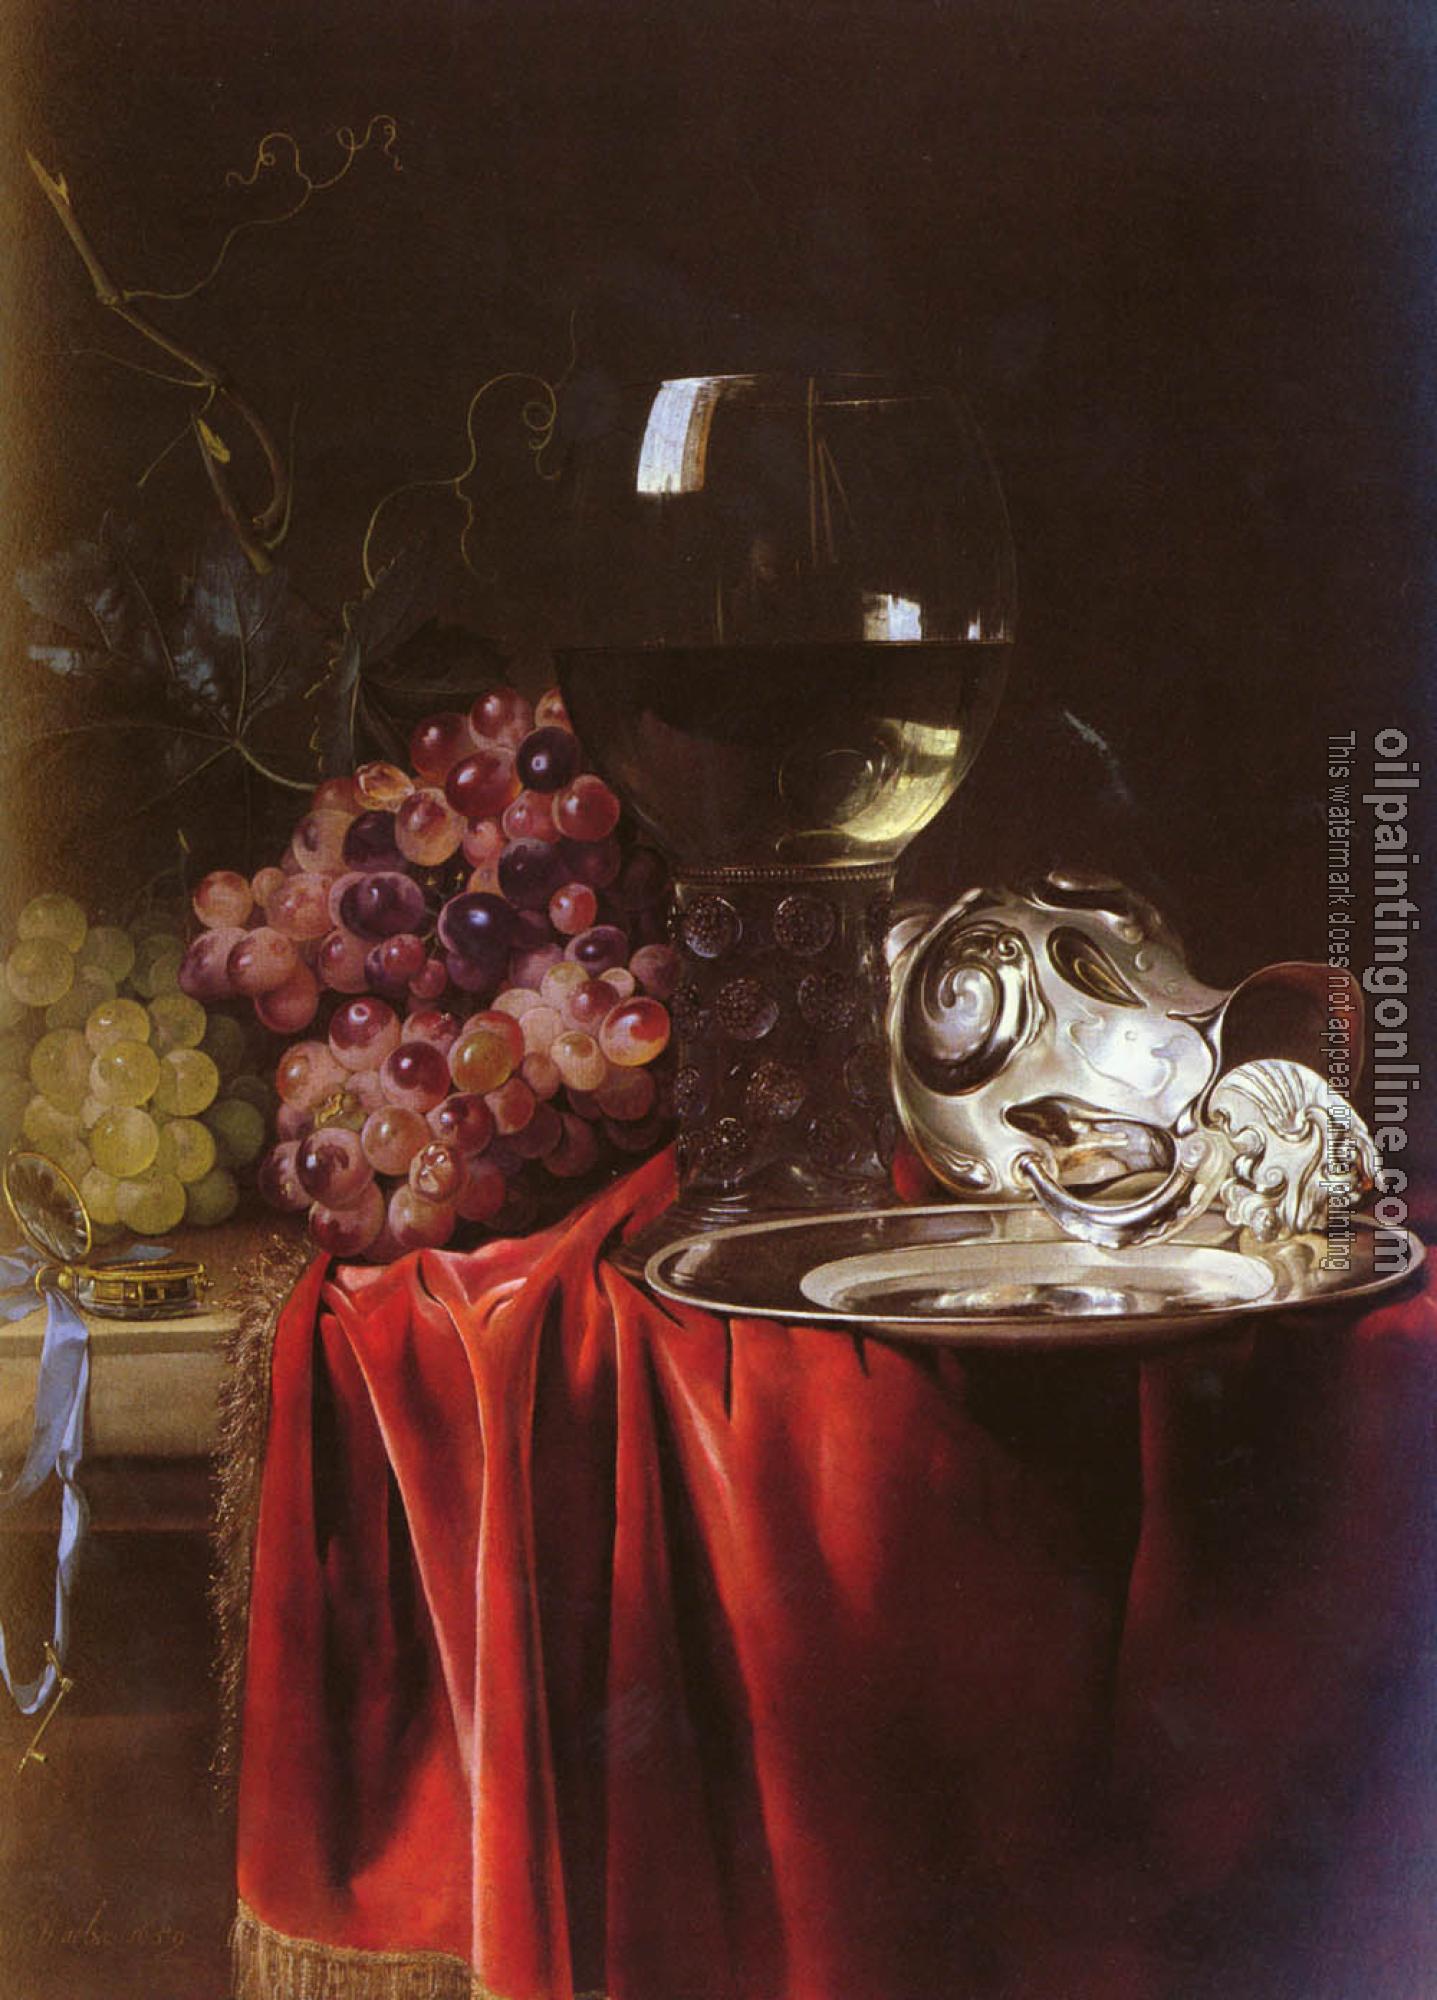 Aelst, Willem van - A Still Life of Grapes, a Roemer, a Silver Ewer and a Plate